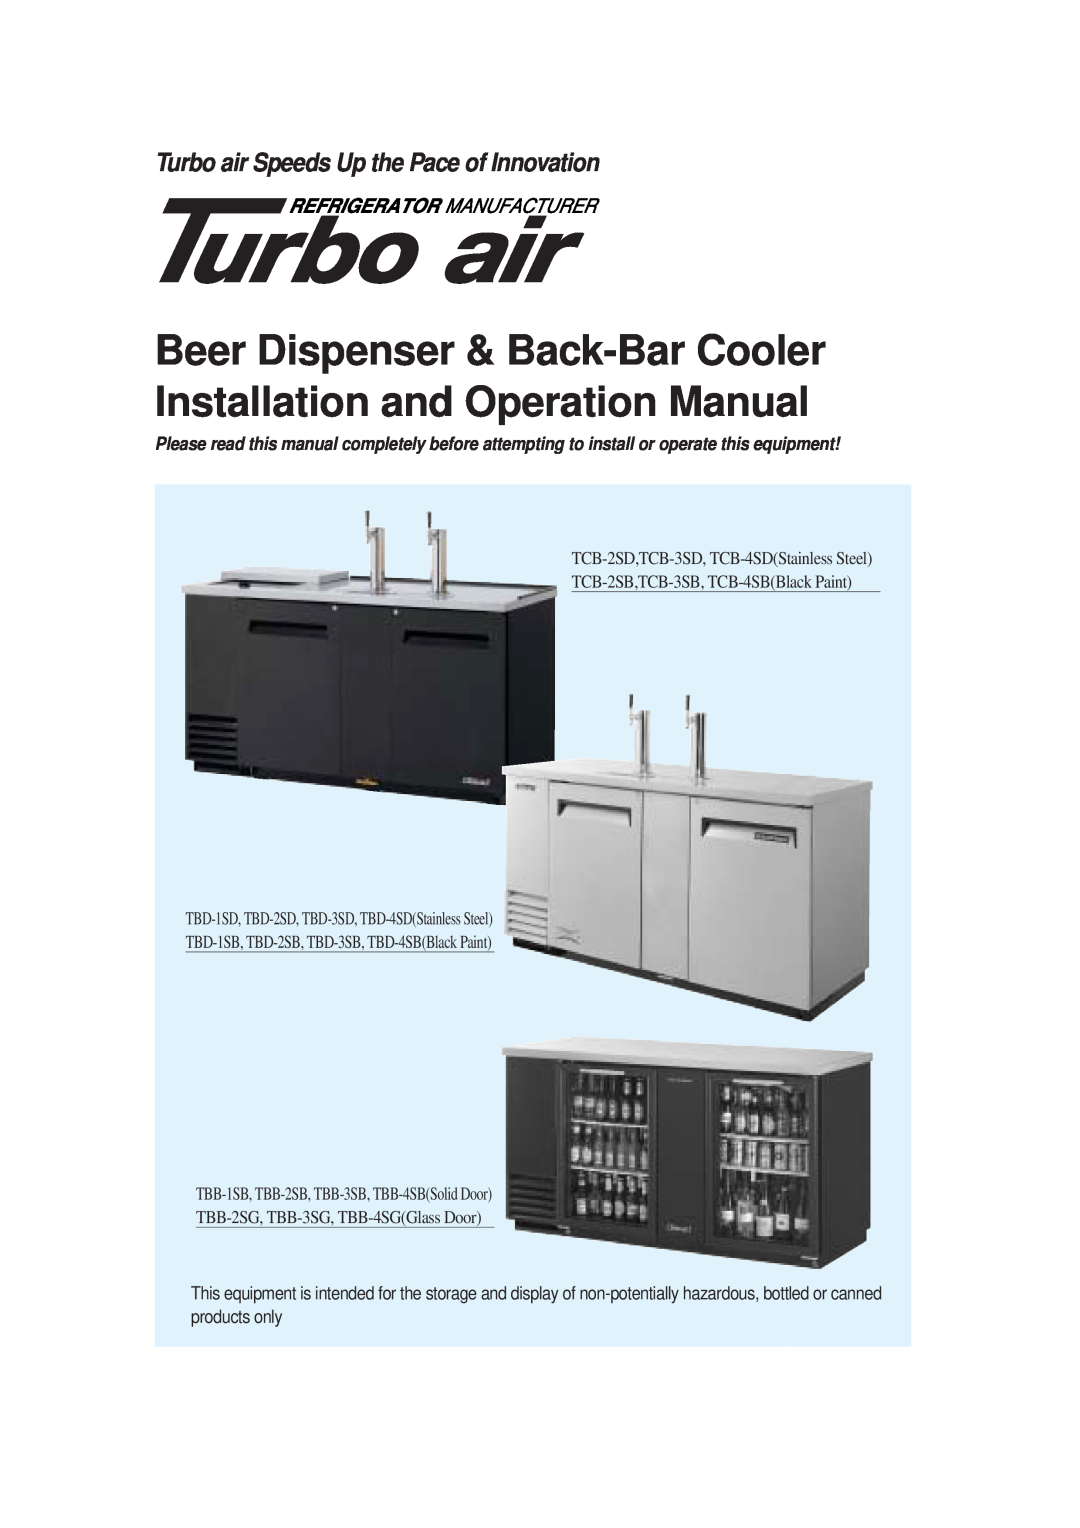 Turbo Air TCB-3SB, TCB-4SD, TCB-4SB, TCB-2SD, TCB-3SD, TBD-3SB operation manual Turbo air Speeds Up the Pace of Innovation 